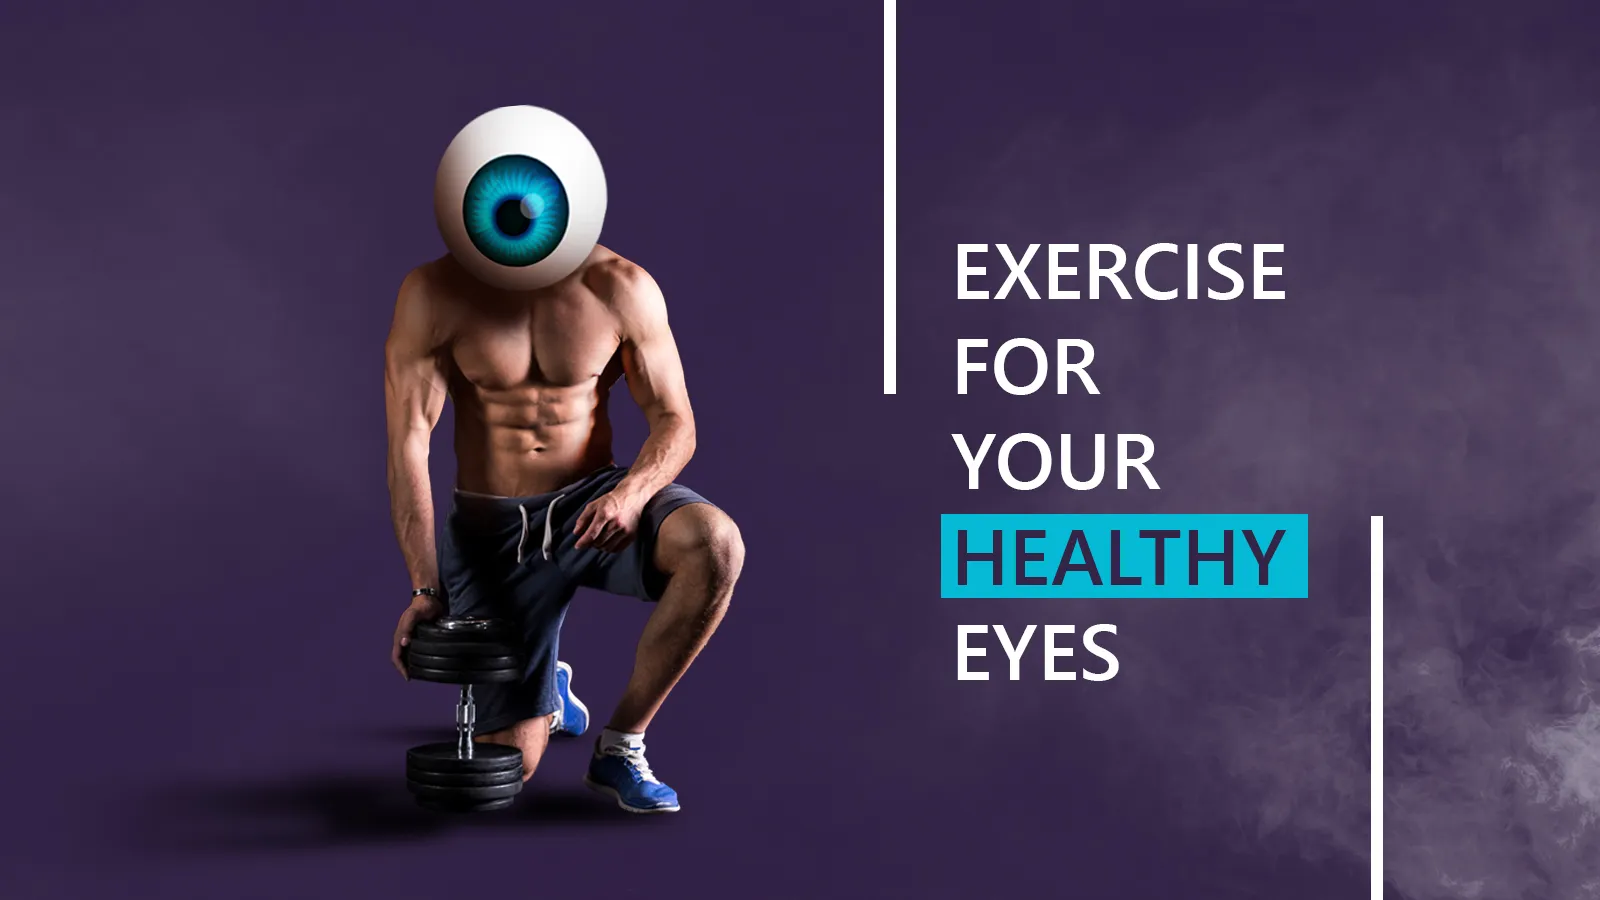 Top 5 Exercises For Your Healthy Eyes